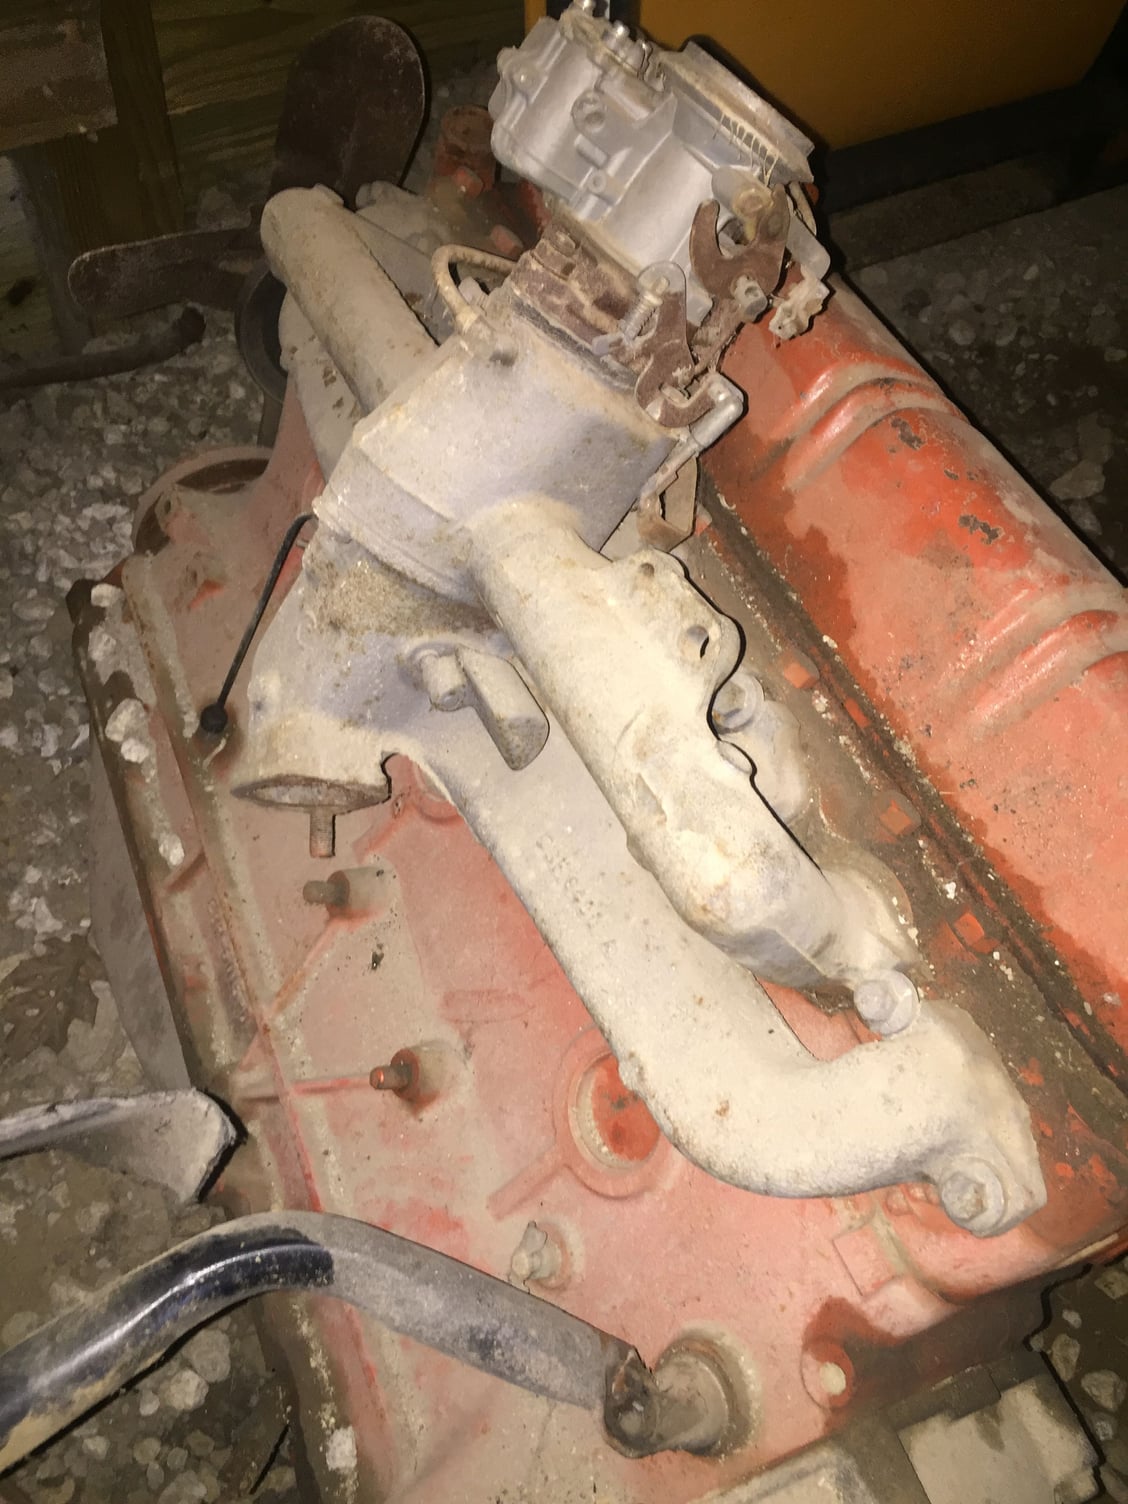 223 Exhaust Manifold Part Number Help - Ford Truck Enthusiasts Forums